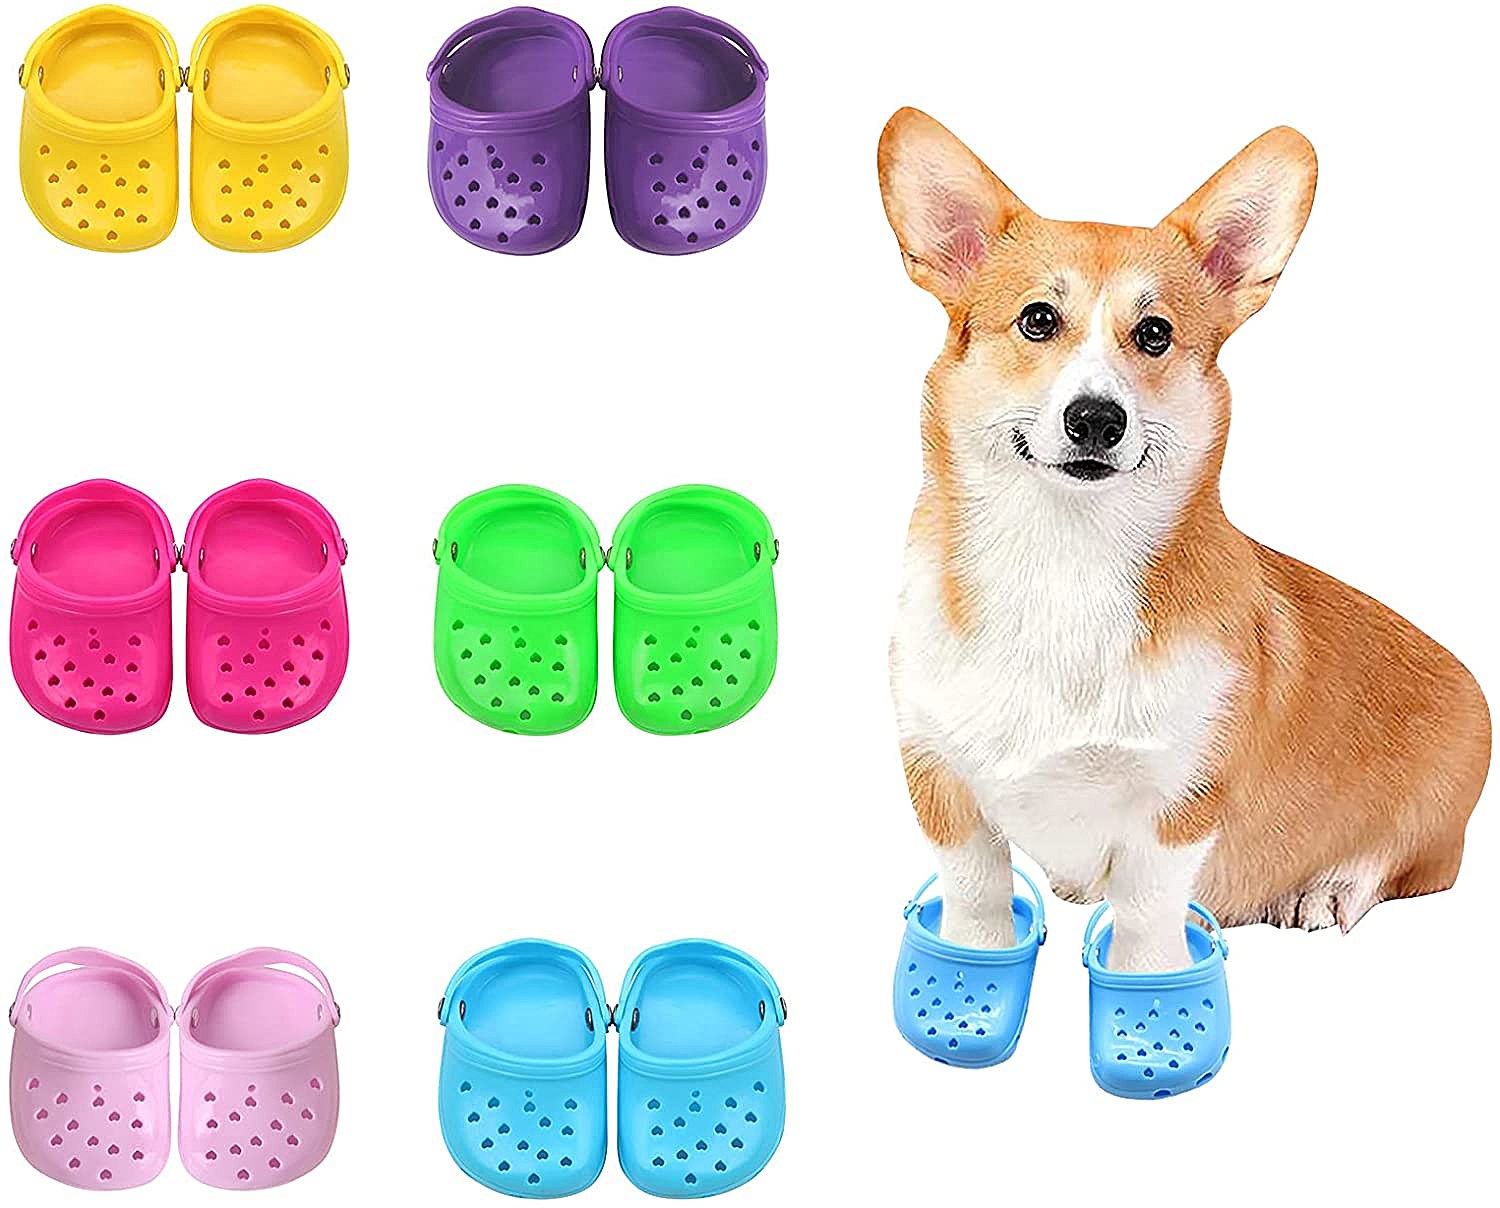 Crocs for Your Dog Are Now a Thing Thanks to Tiktok